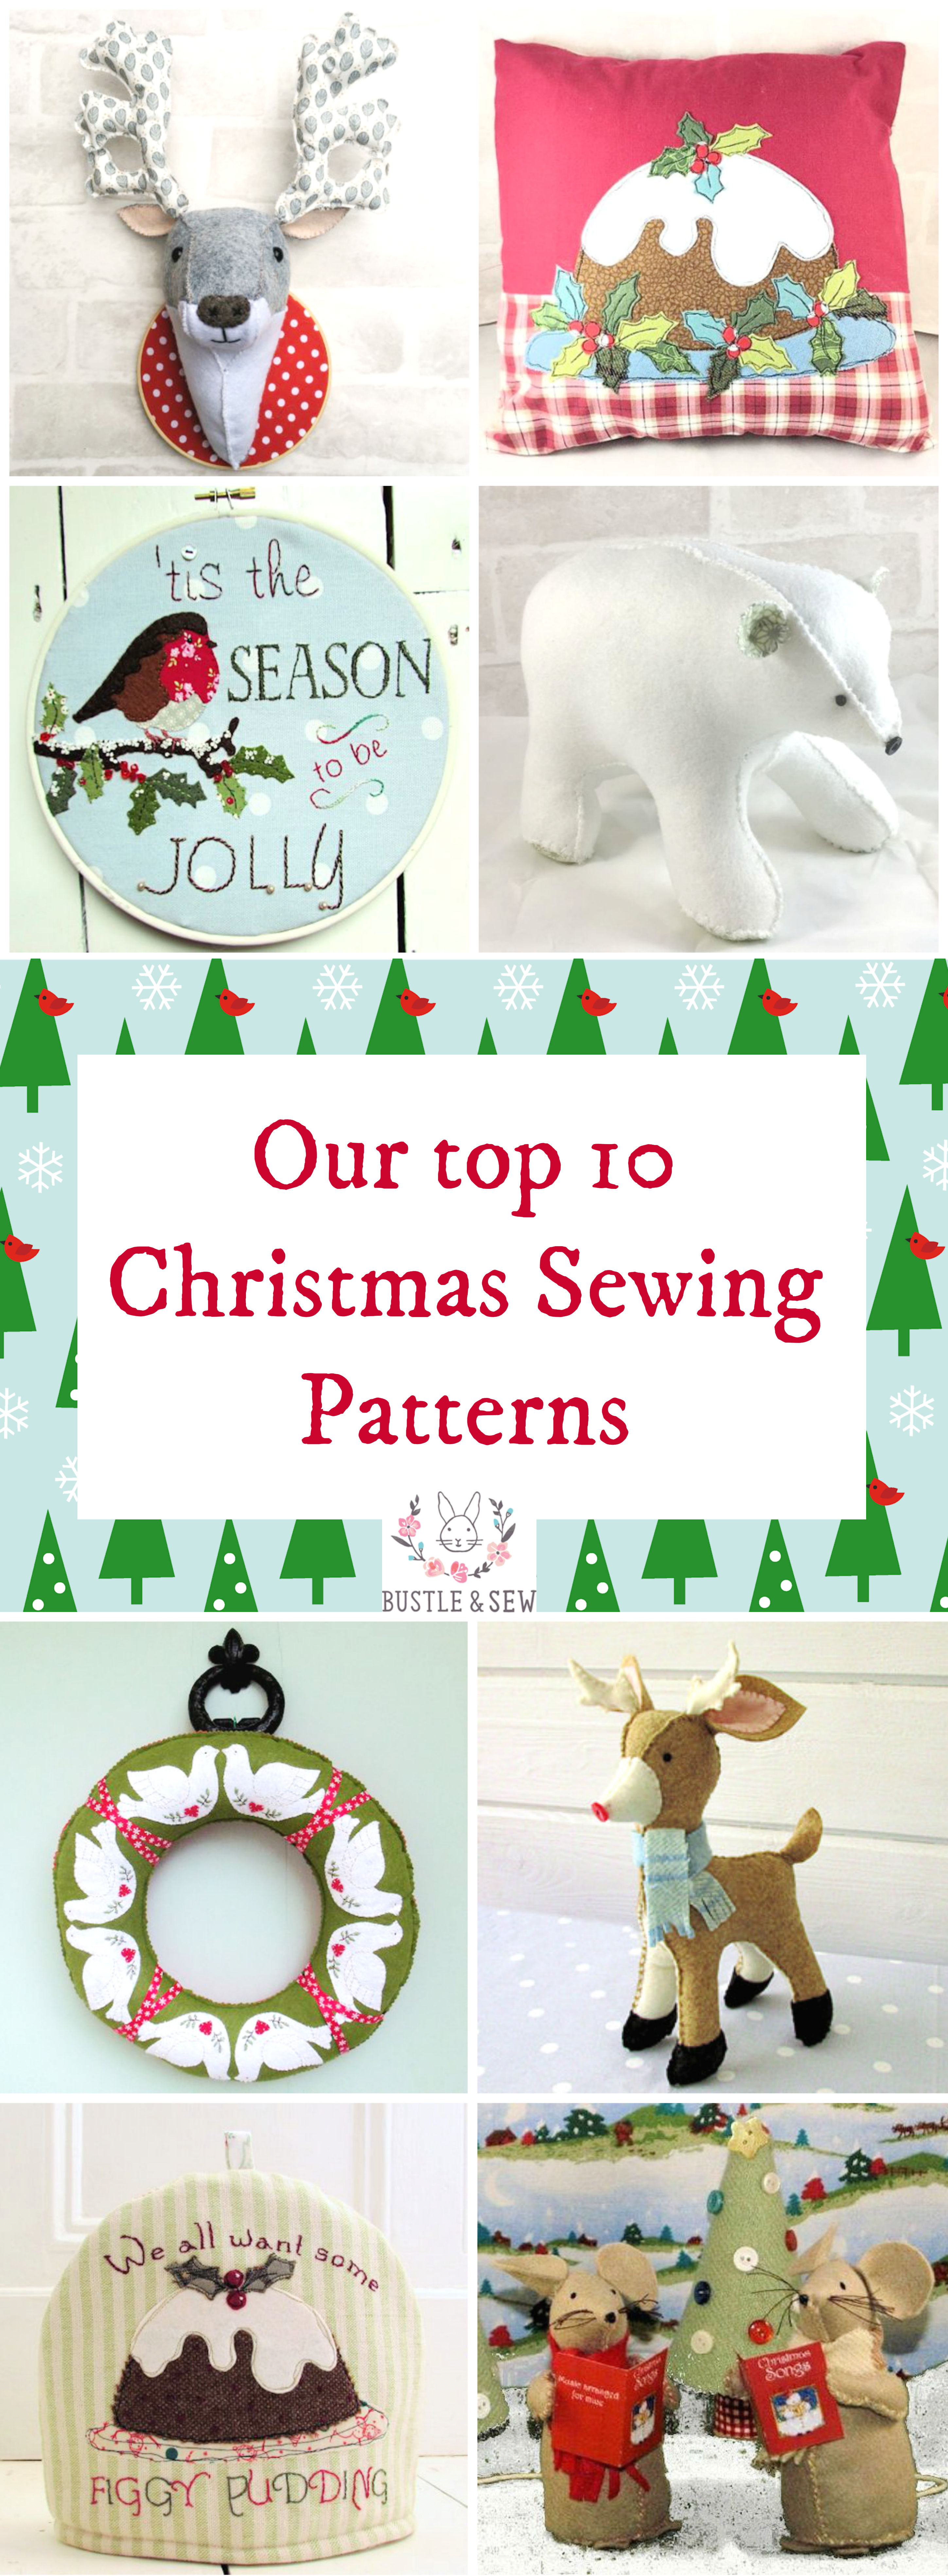 Top 10 Christmas Patterns by Bustle & Sew